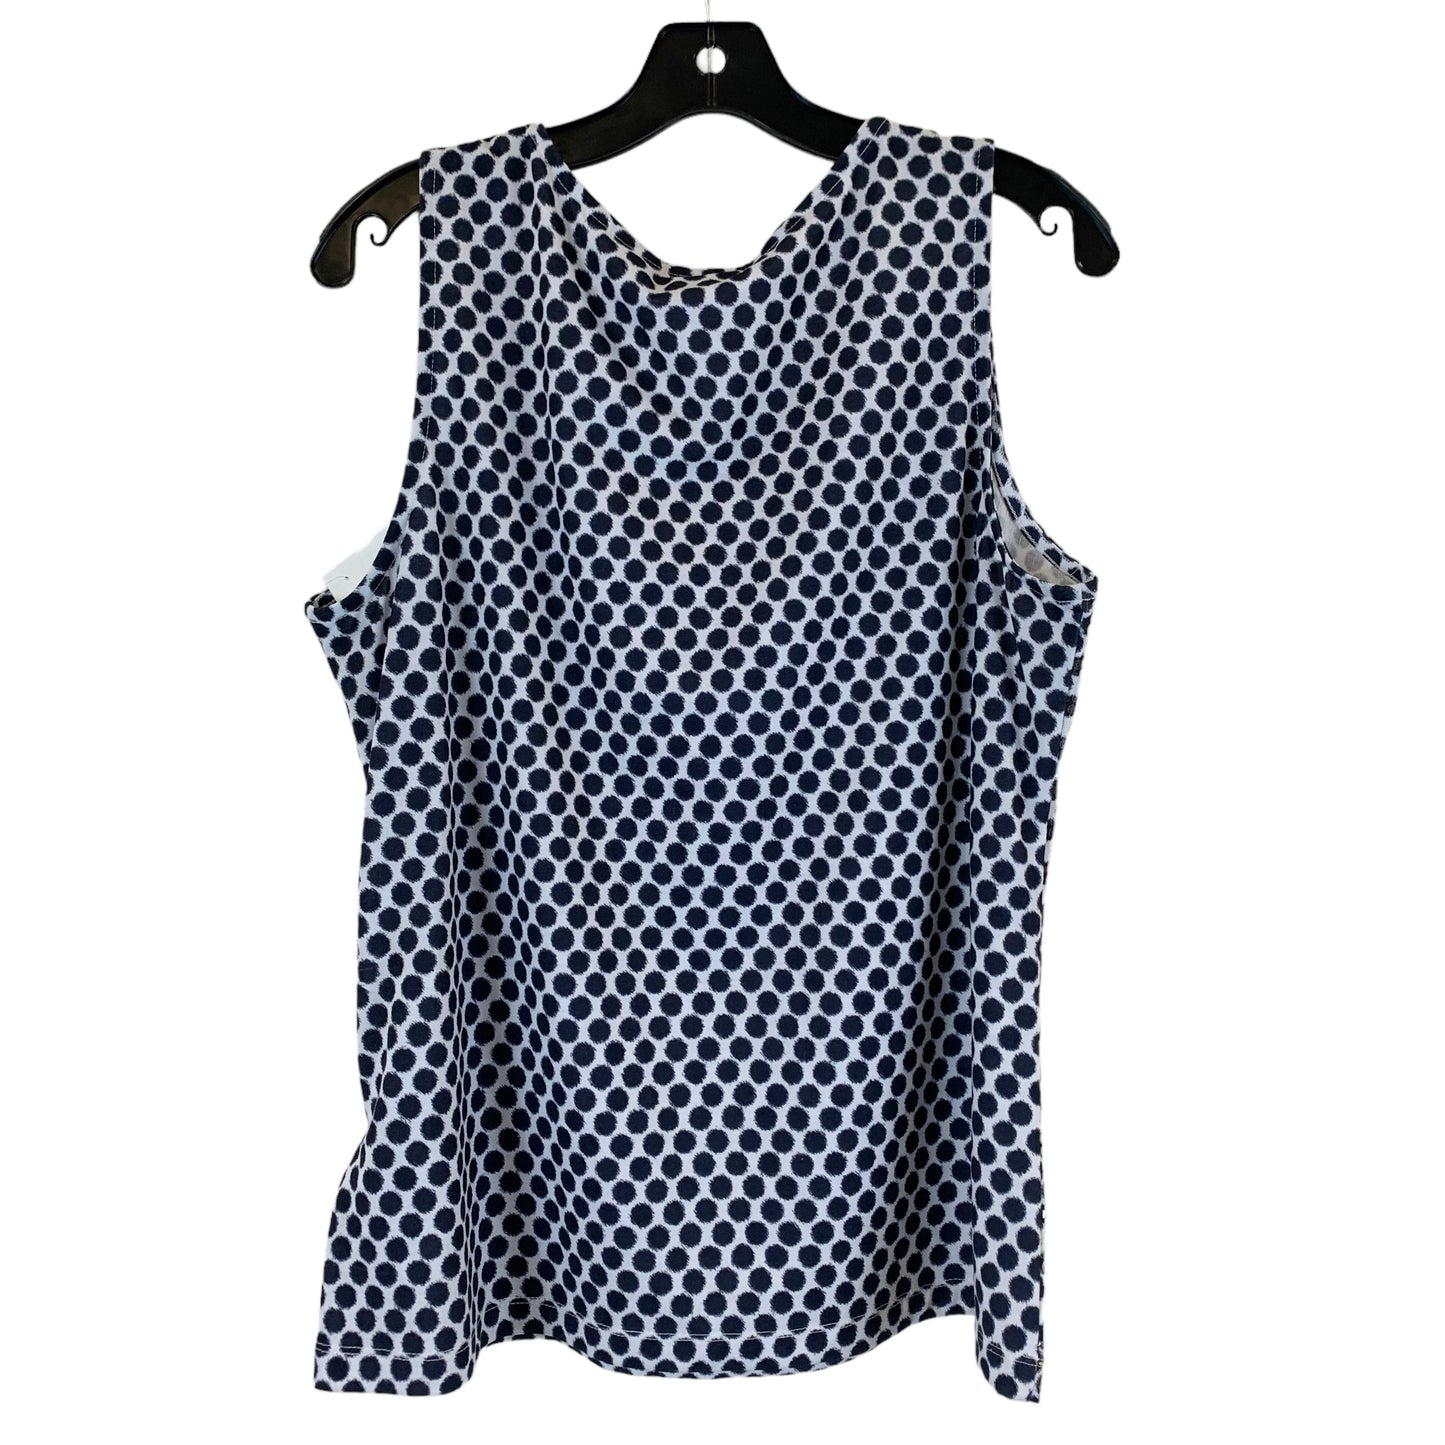 Top Sleeveless By Zenergy By Chicos  Size: L